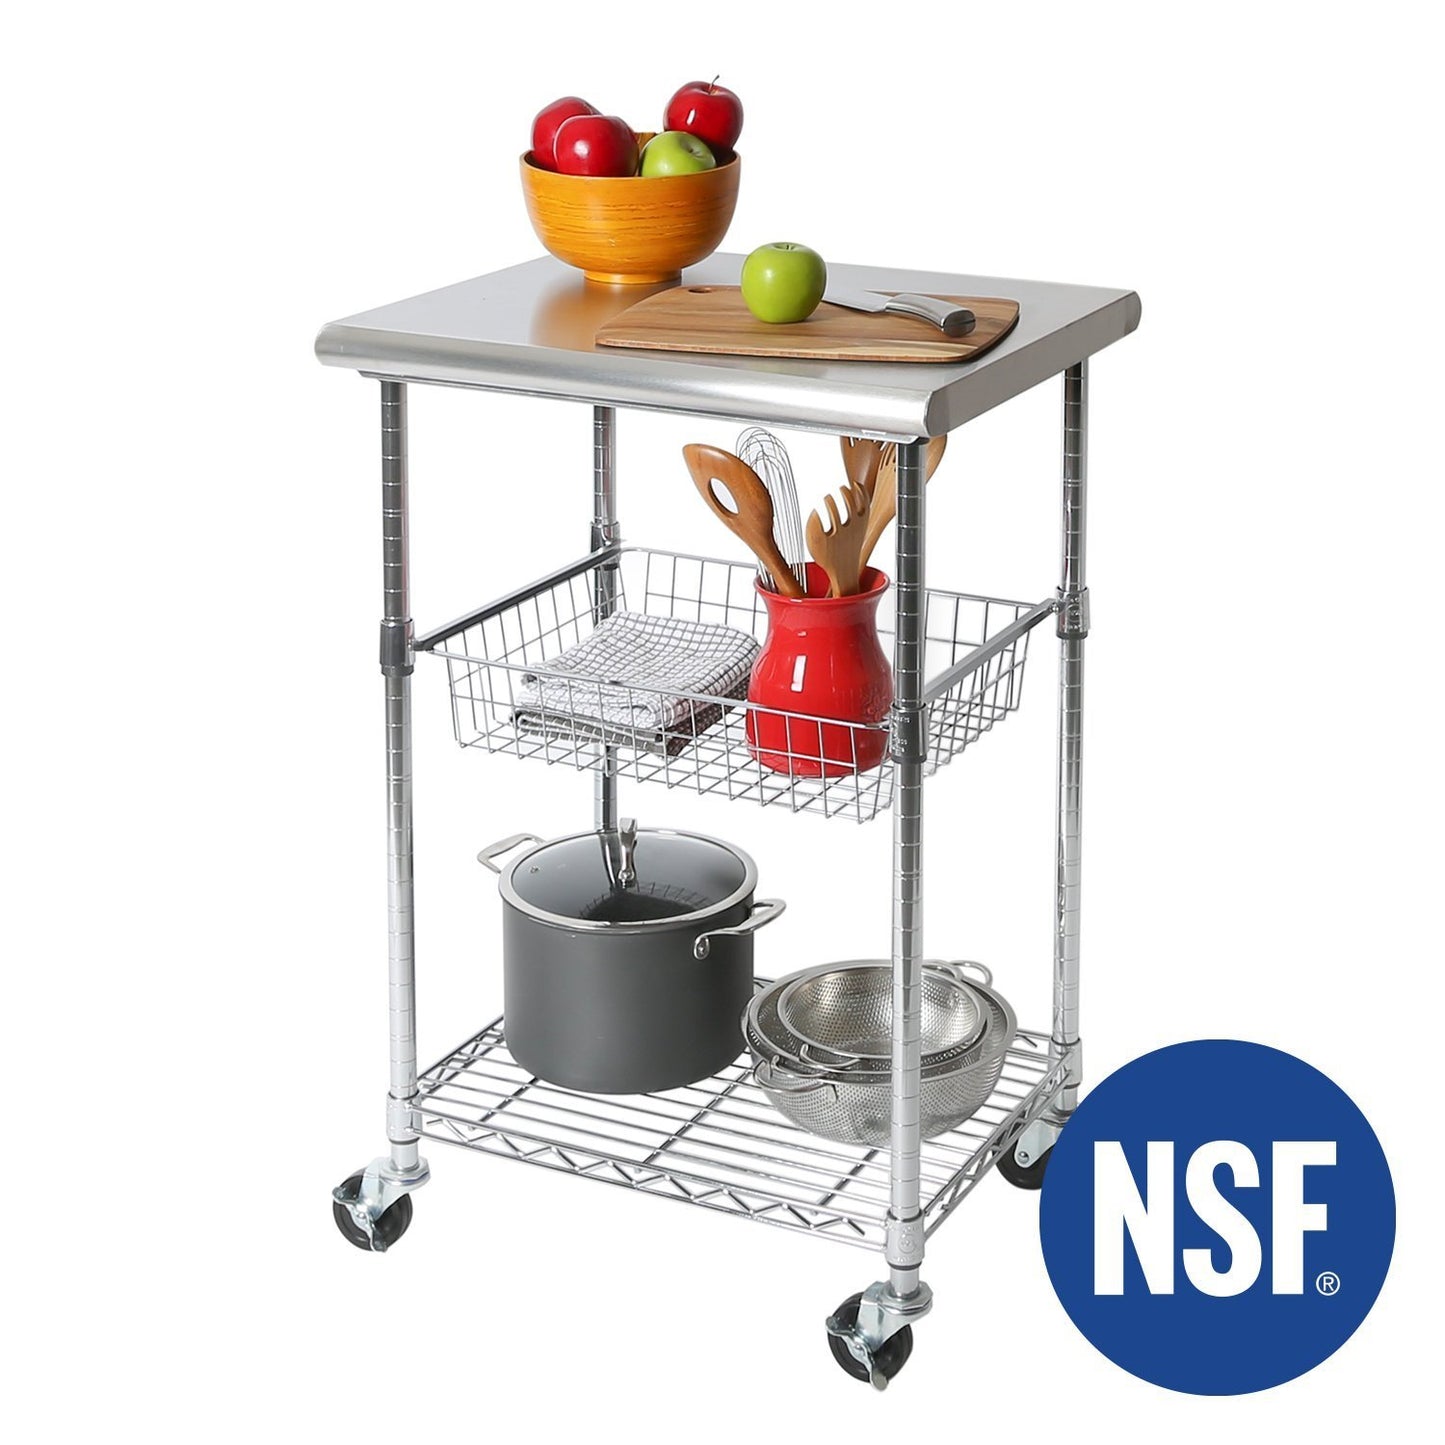 Order now seville classics stainless steel nsf certified professional kitchen work table cart 24 w x 20 d x 36 h